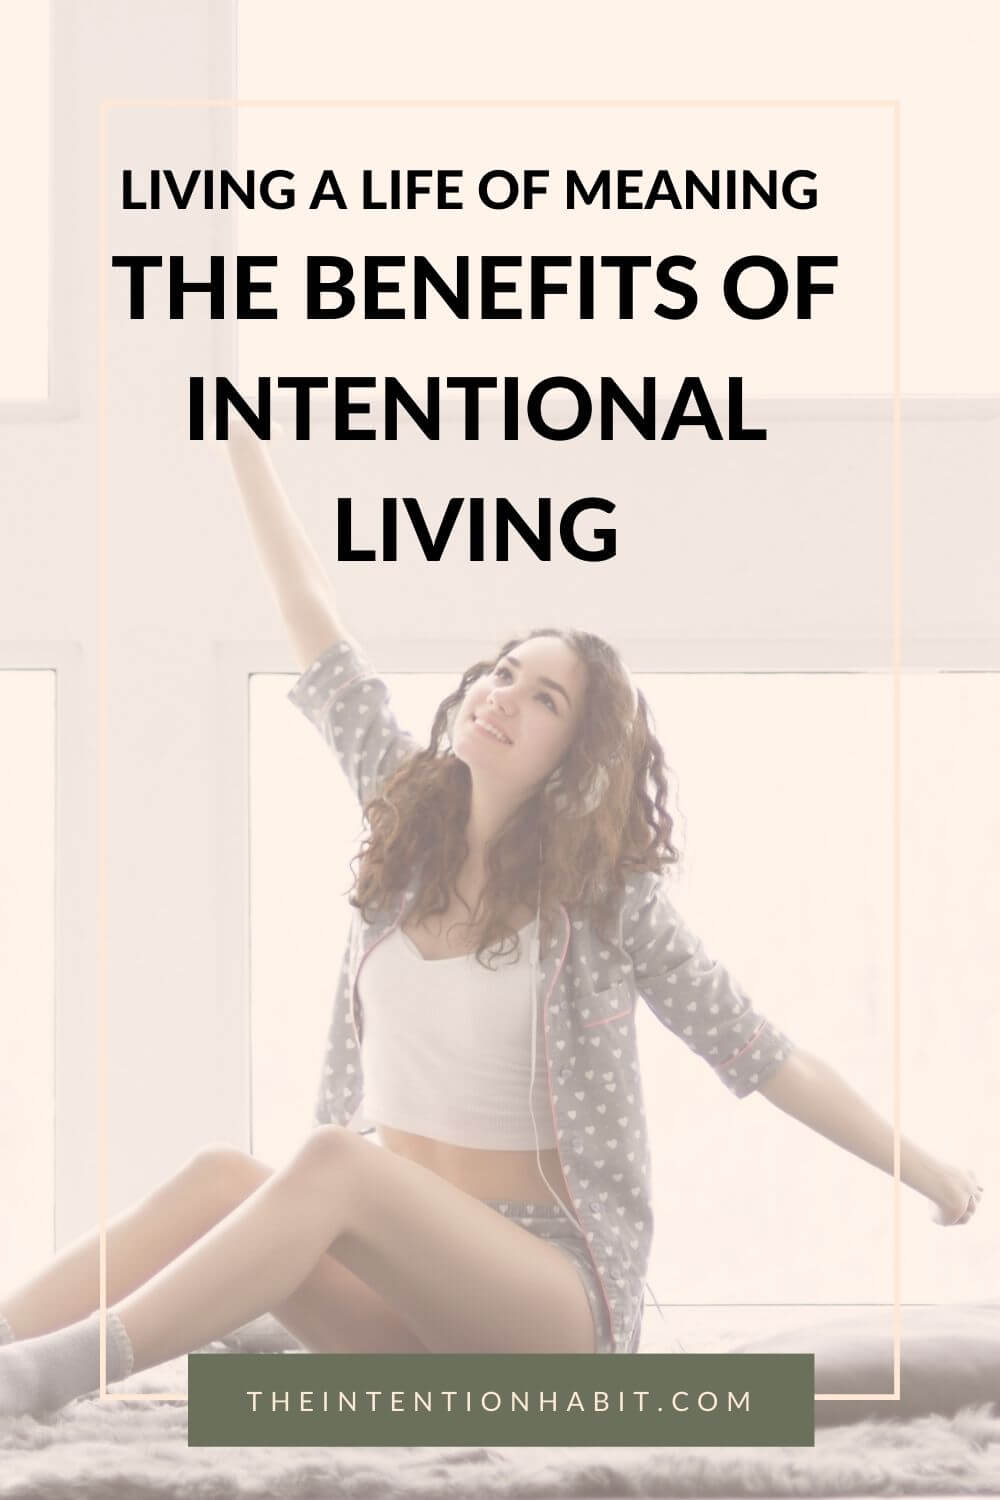 Living a life of meaning - The benefits of intentional living